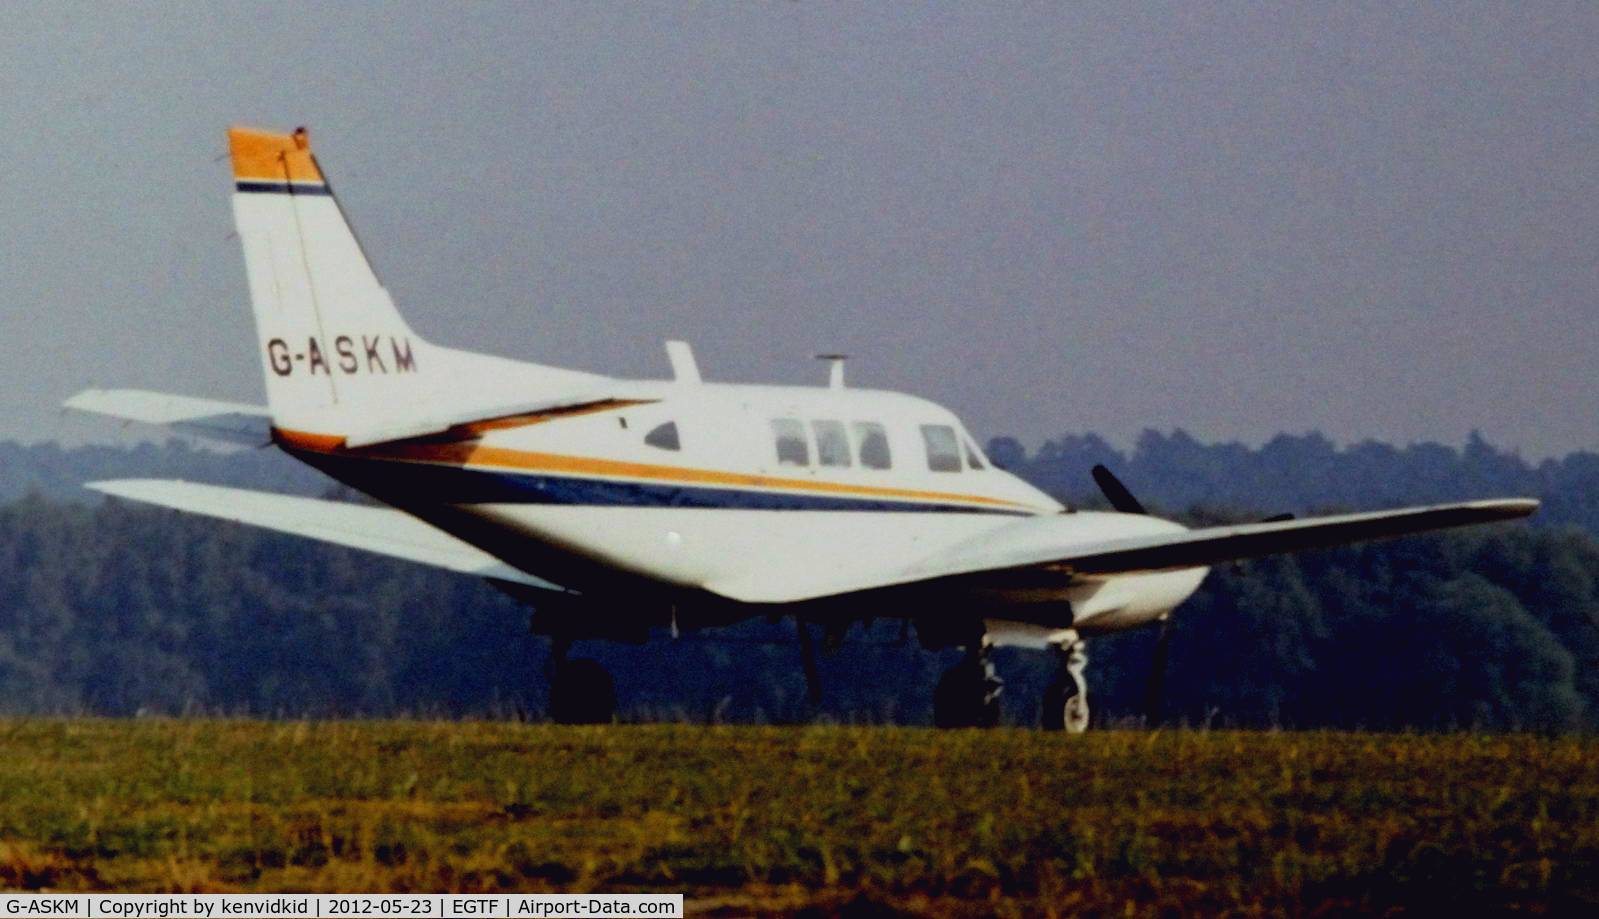 G-ASKM, 1963 Beech 65-80 Queen Air C/N LD-116, At Fairoaks in the mid 1970's.
Copied from slide.